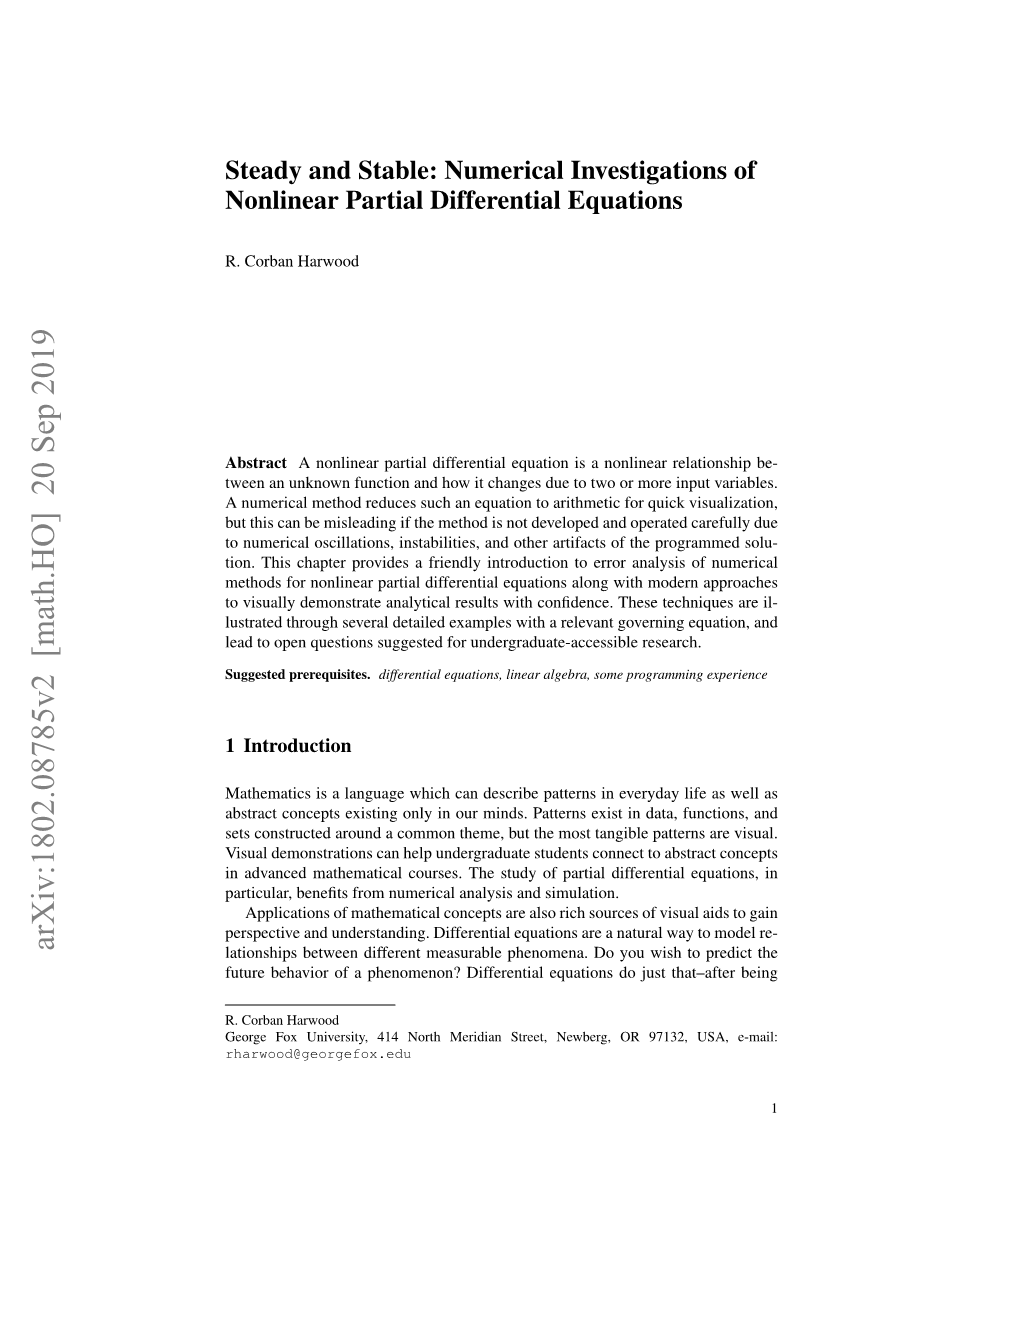 Steady and Stable: Numerical Investigations of Nonlinear Partial Differential Equations